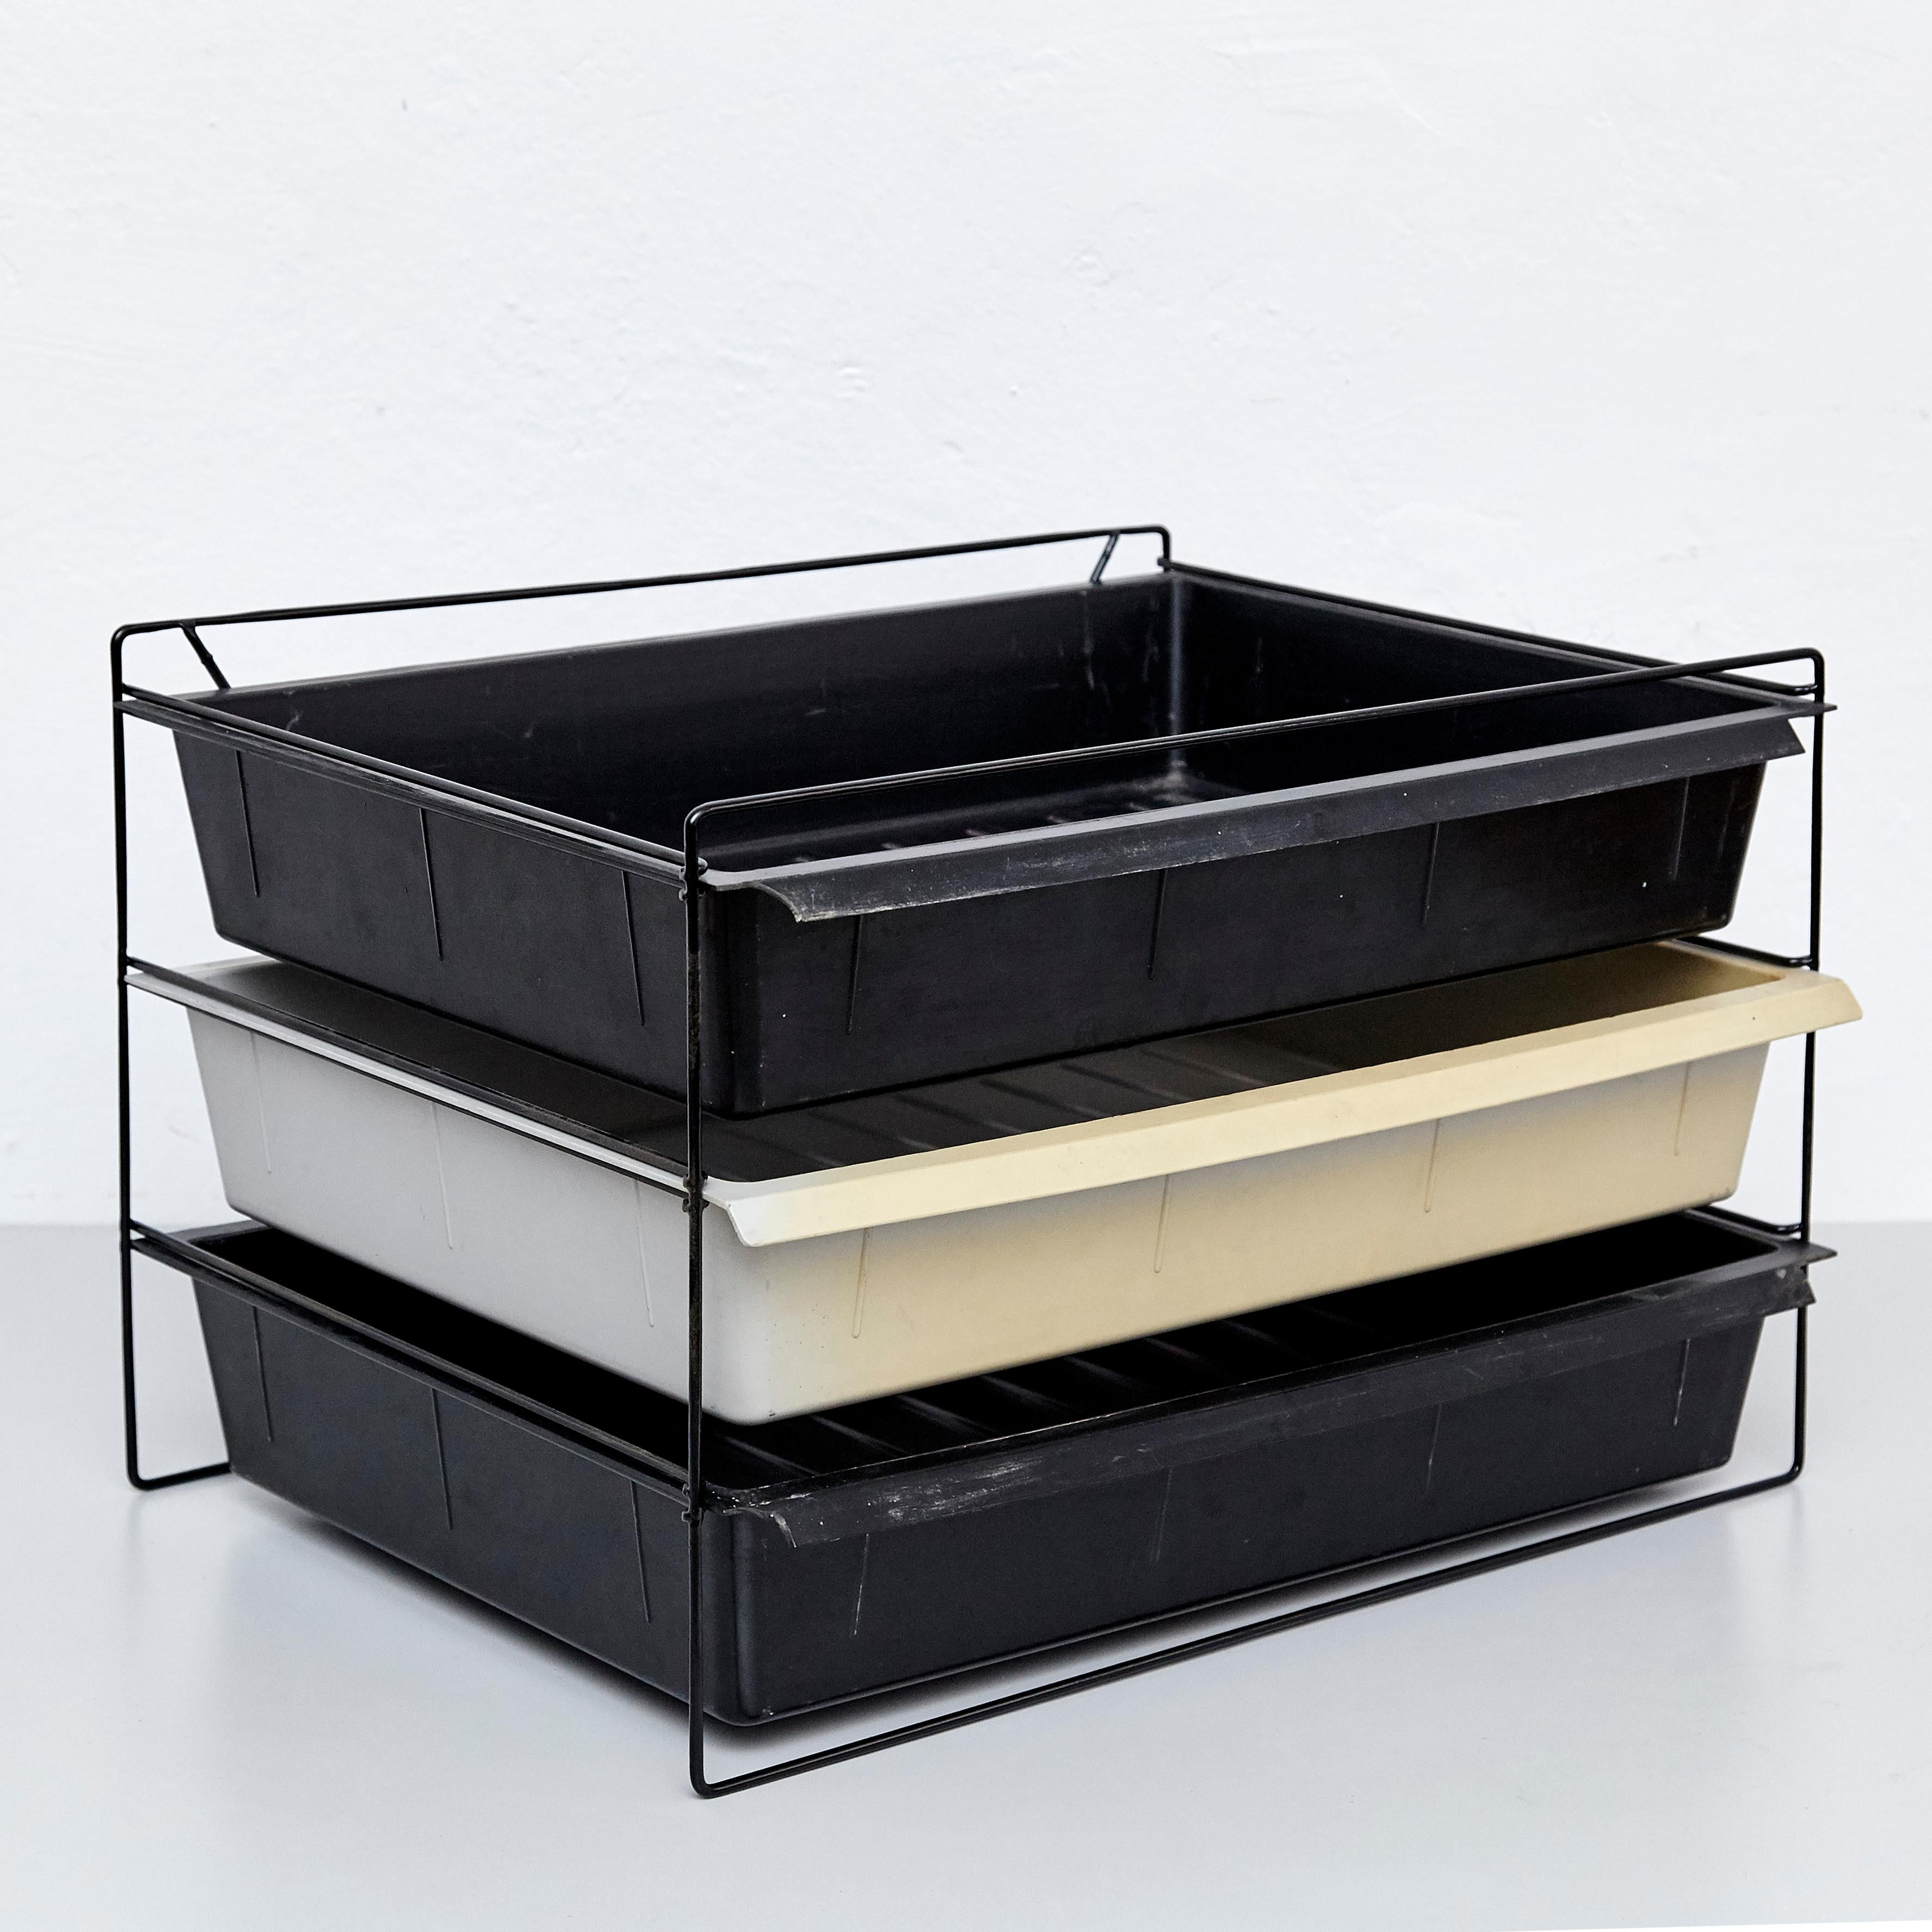 French Charlotte Perriand Mid-Century Modern Metal and Plastic File Rack, circa 1950